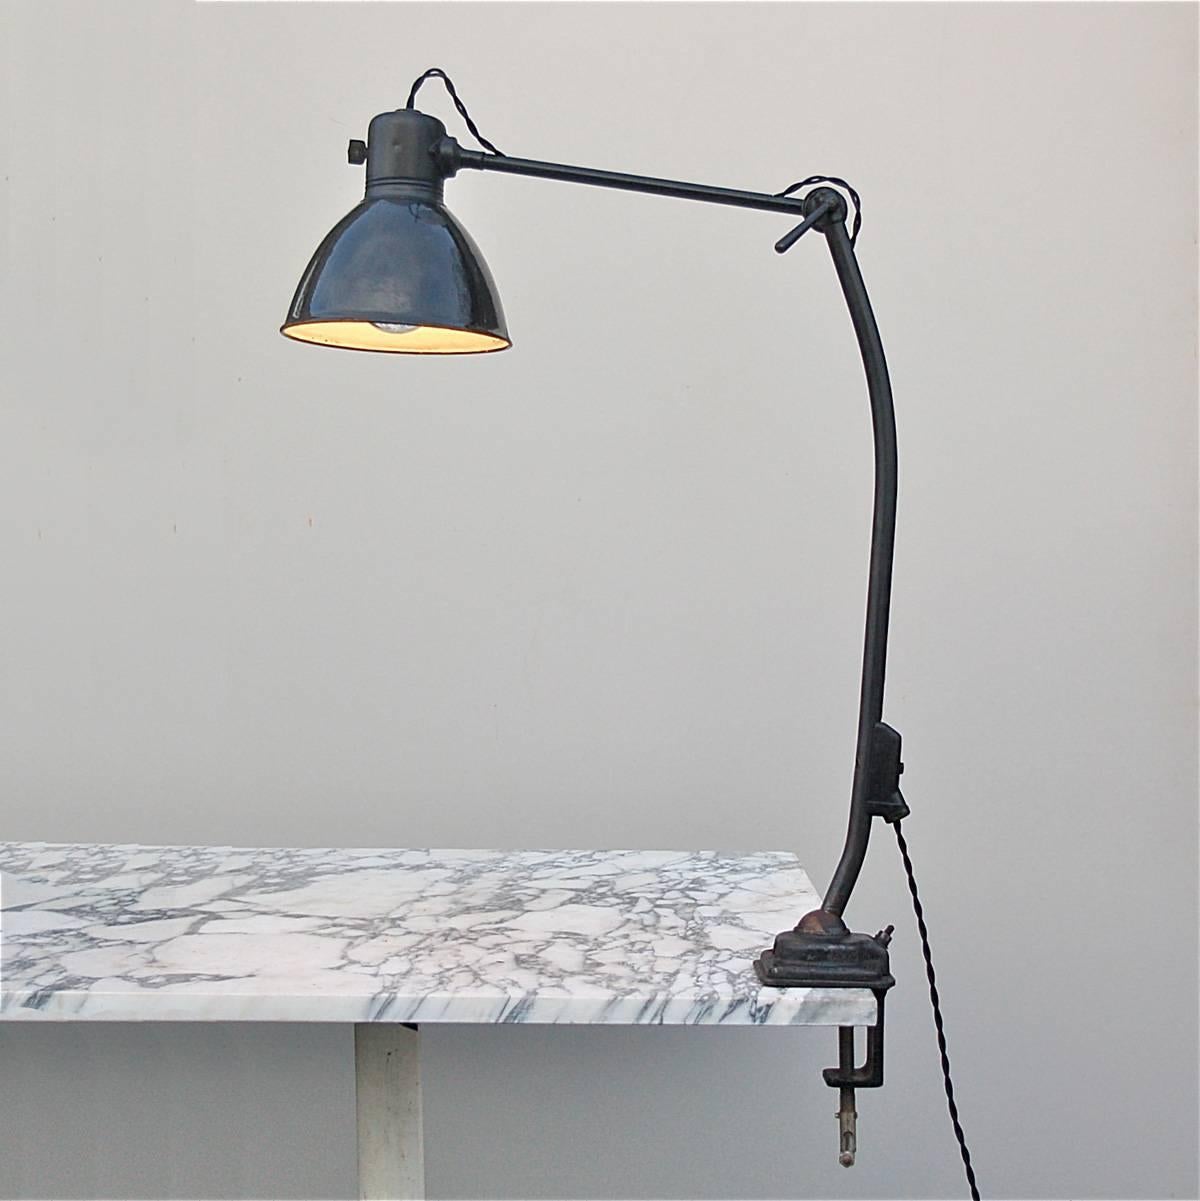 Unique features of this workbench or desk lamp include a solid metal base with rotating ball joint and slightly curved jointed arm which allow the lamp's position to be adjusted. The lamp has been completely rewired by a qualified electrician using